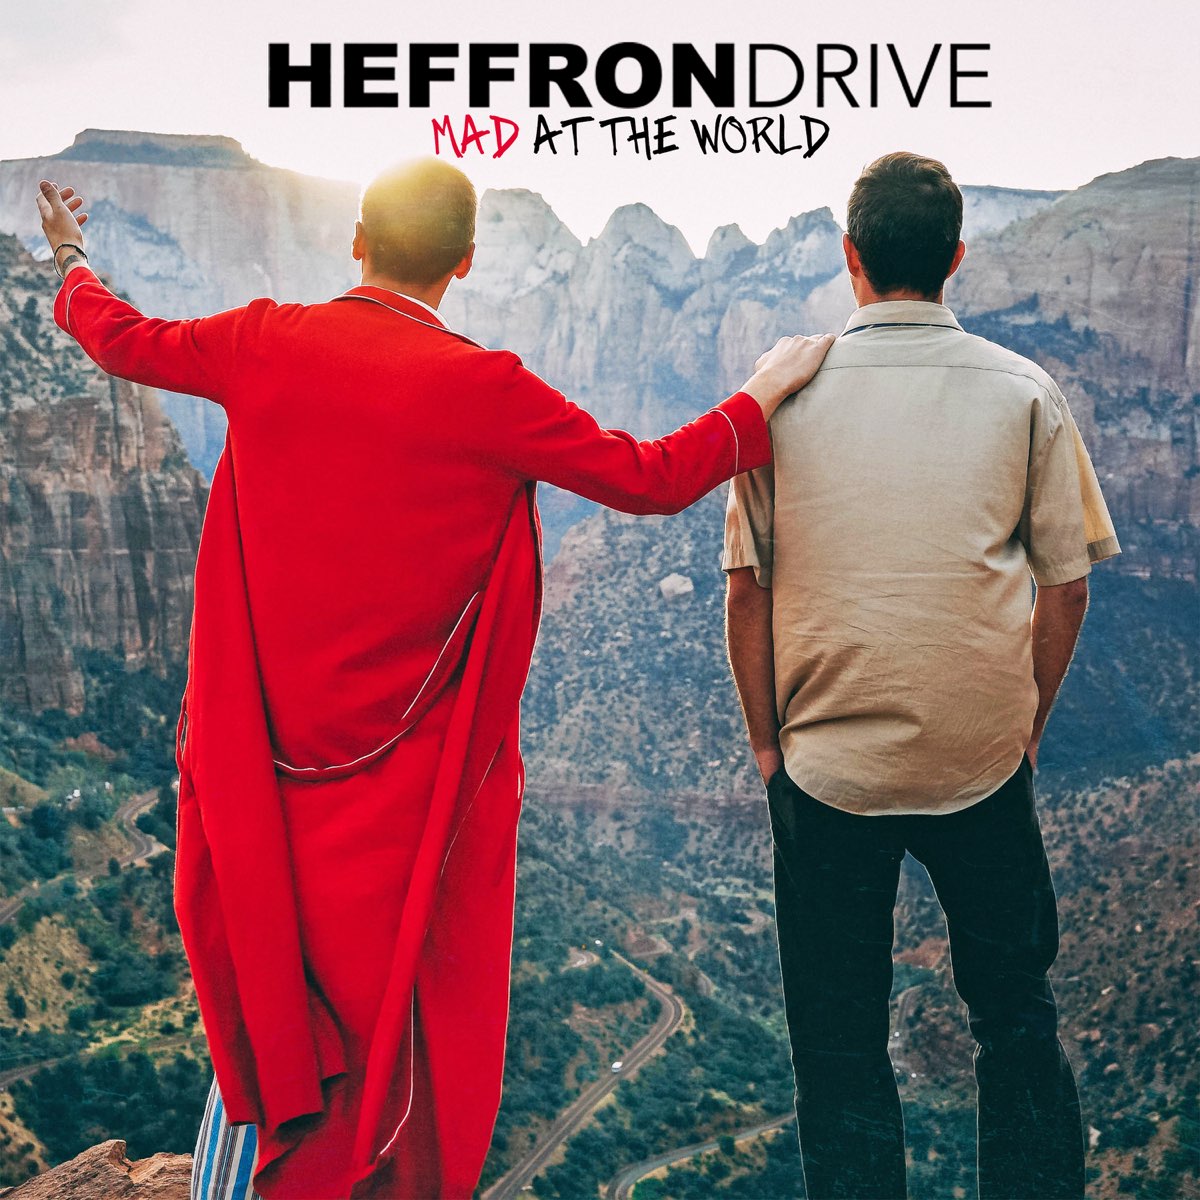 Heffron Drive Mad at the World cover artwork